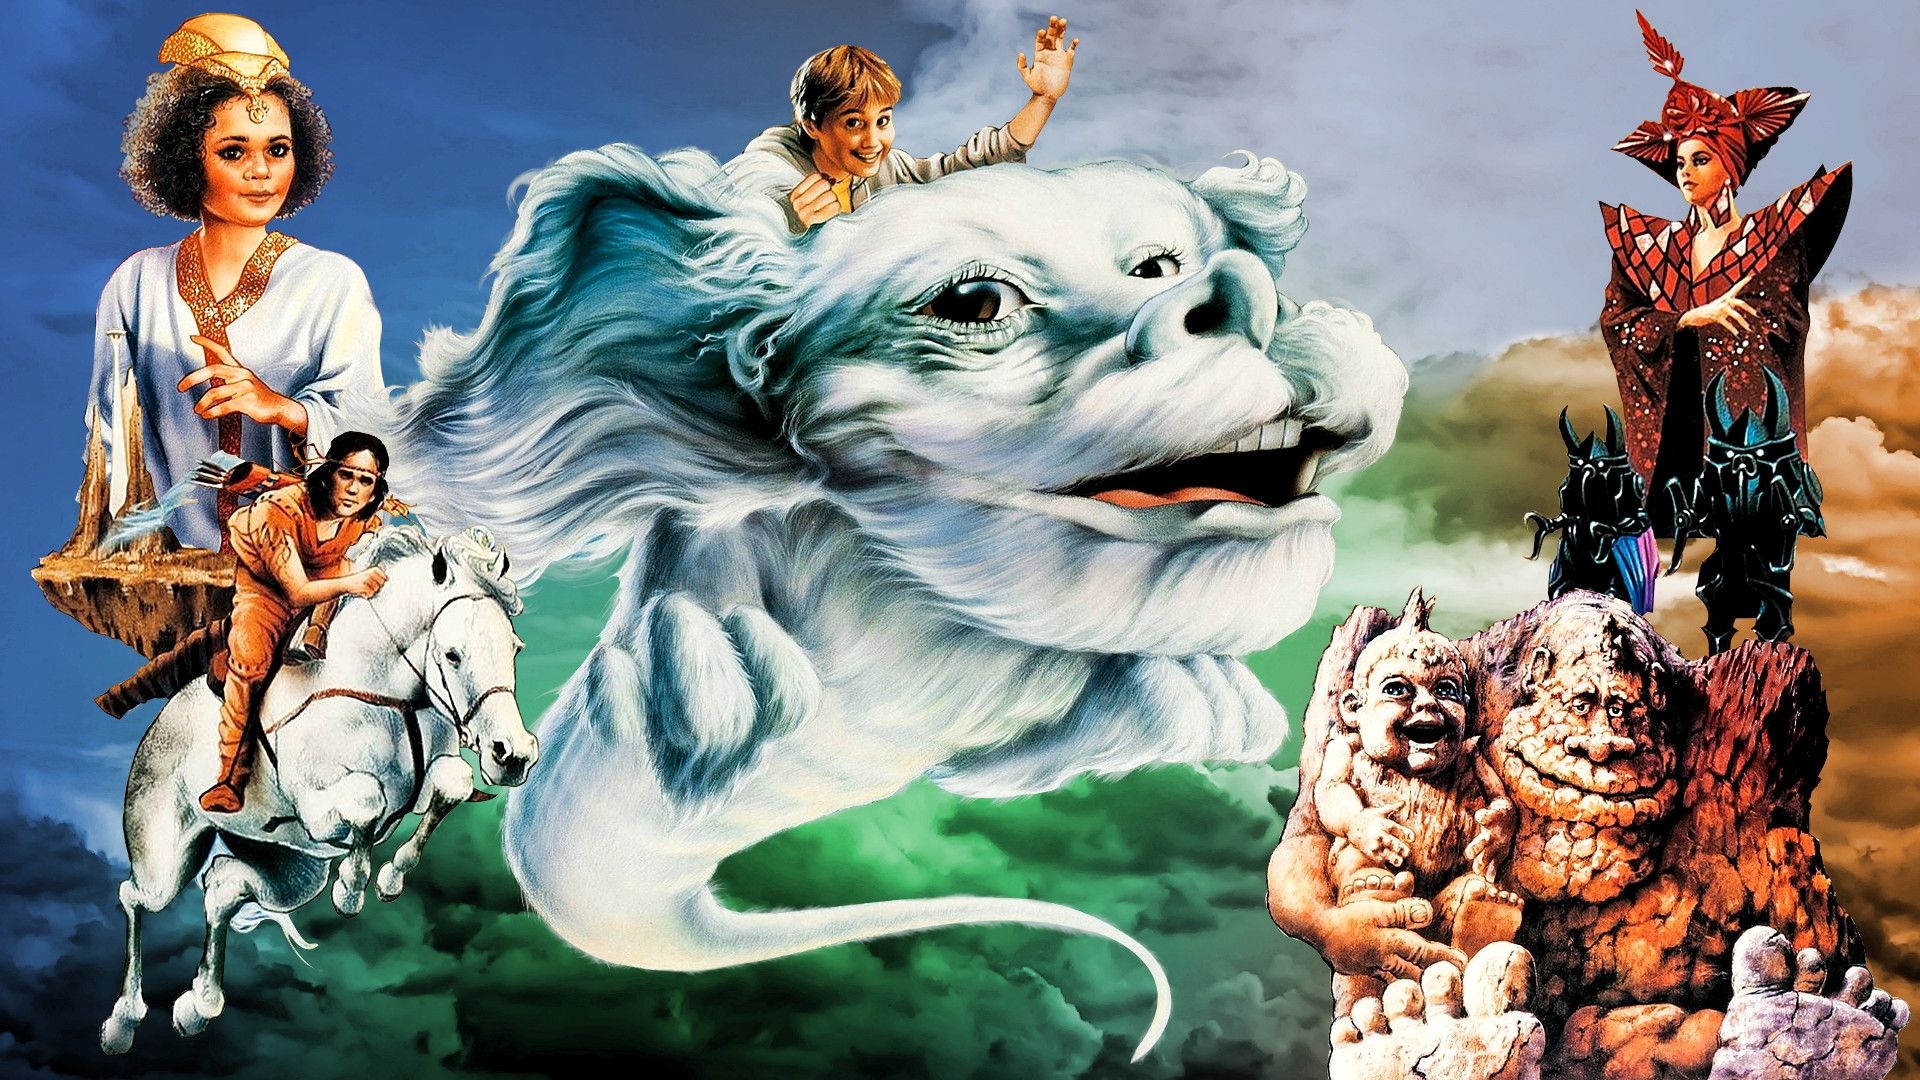 The NeverEnding Story, Behind the scenes, Making details, Fascinating facts, 1920x1080 Full HD Desktop